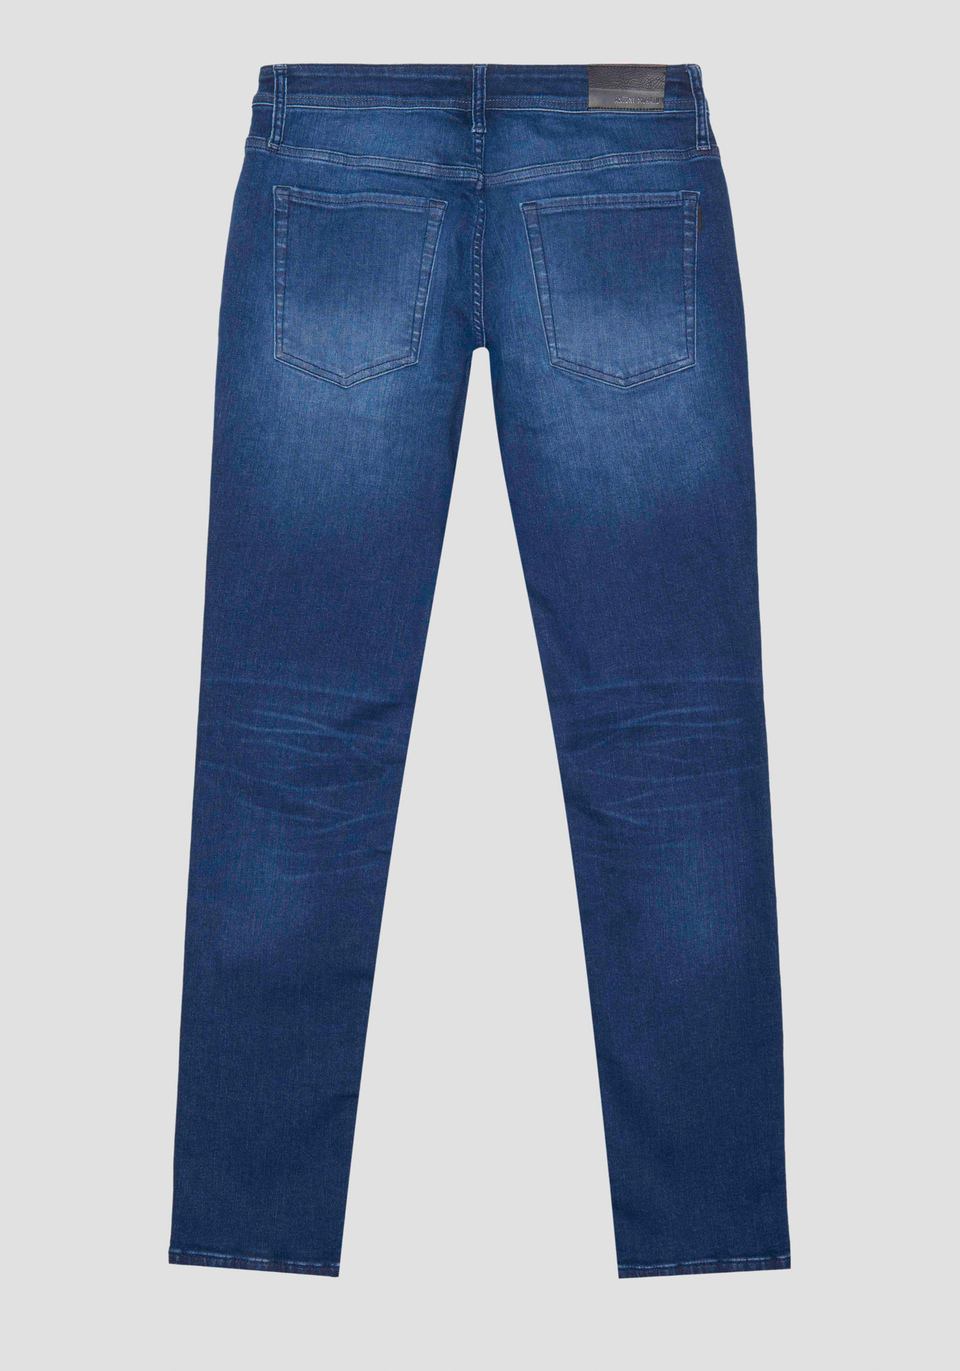 OZZY TAPERED FIT JEANS IN MID BLUE POWER STRETCH DENIM - Antony Morato Online Shop